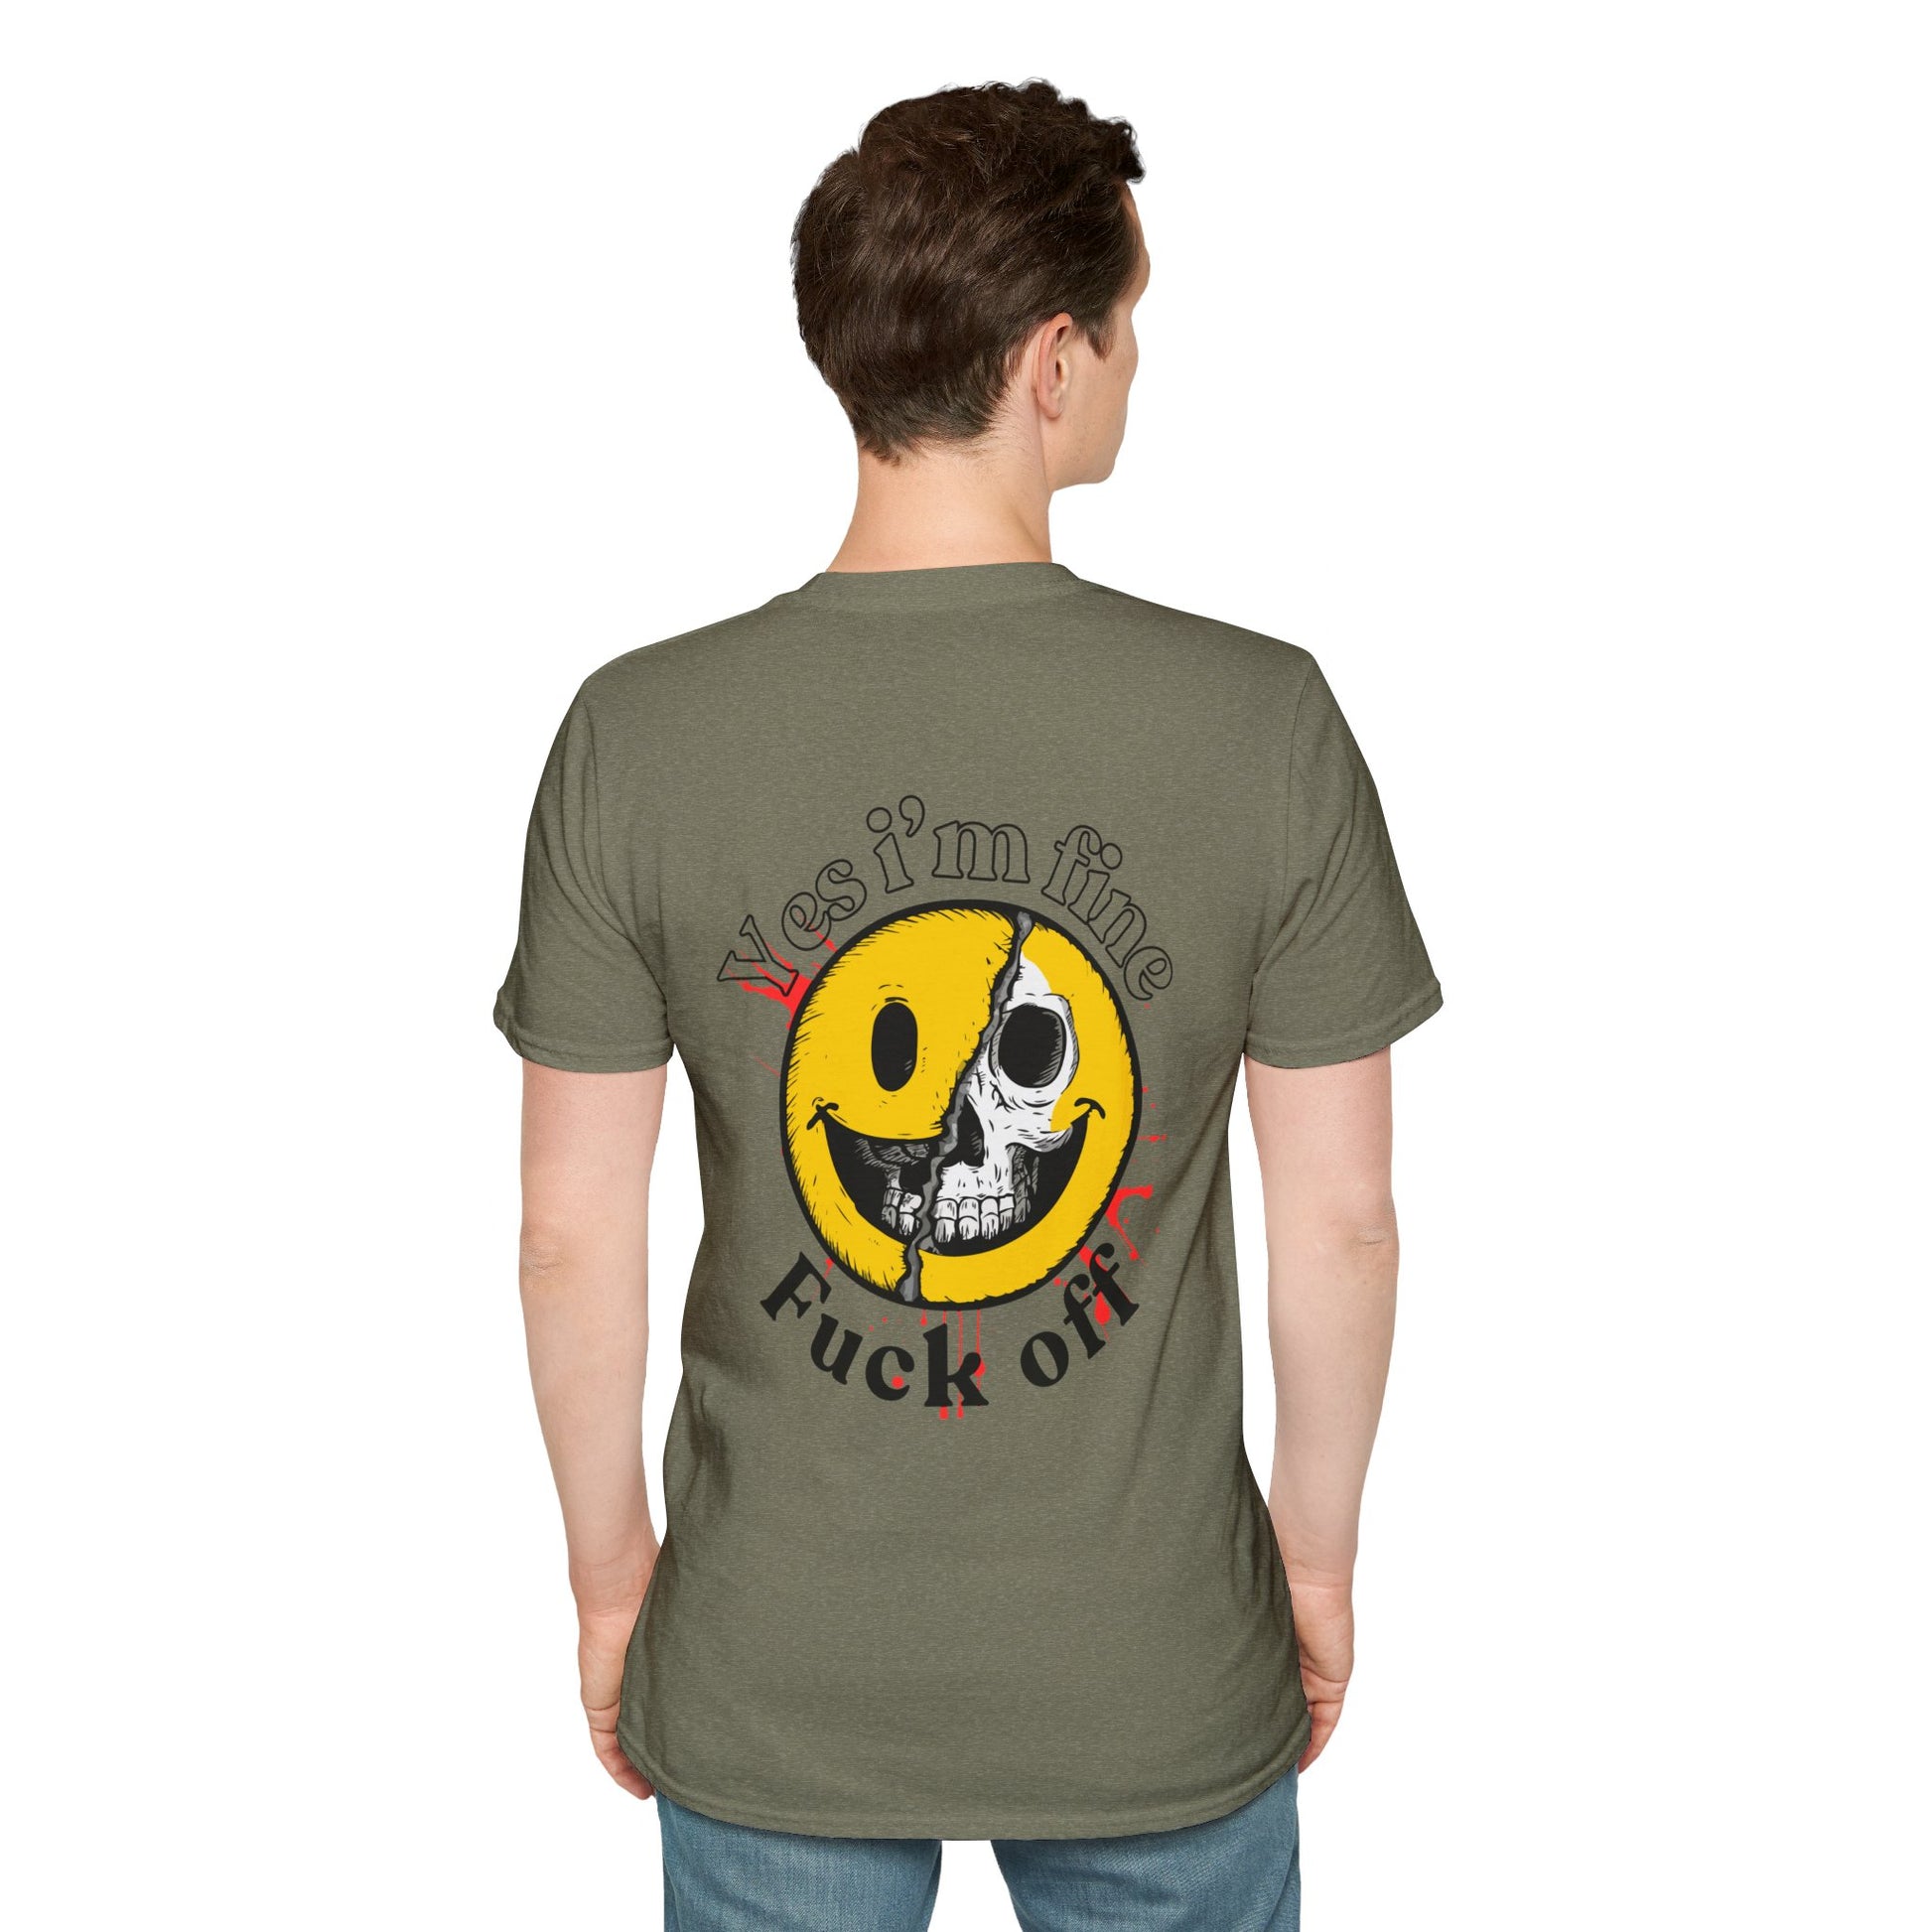 Military green T-shirt with a half smiley, half skull design and bold text 'Yes I'm Fine' and 'Fuck Off' 